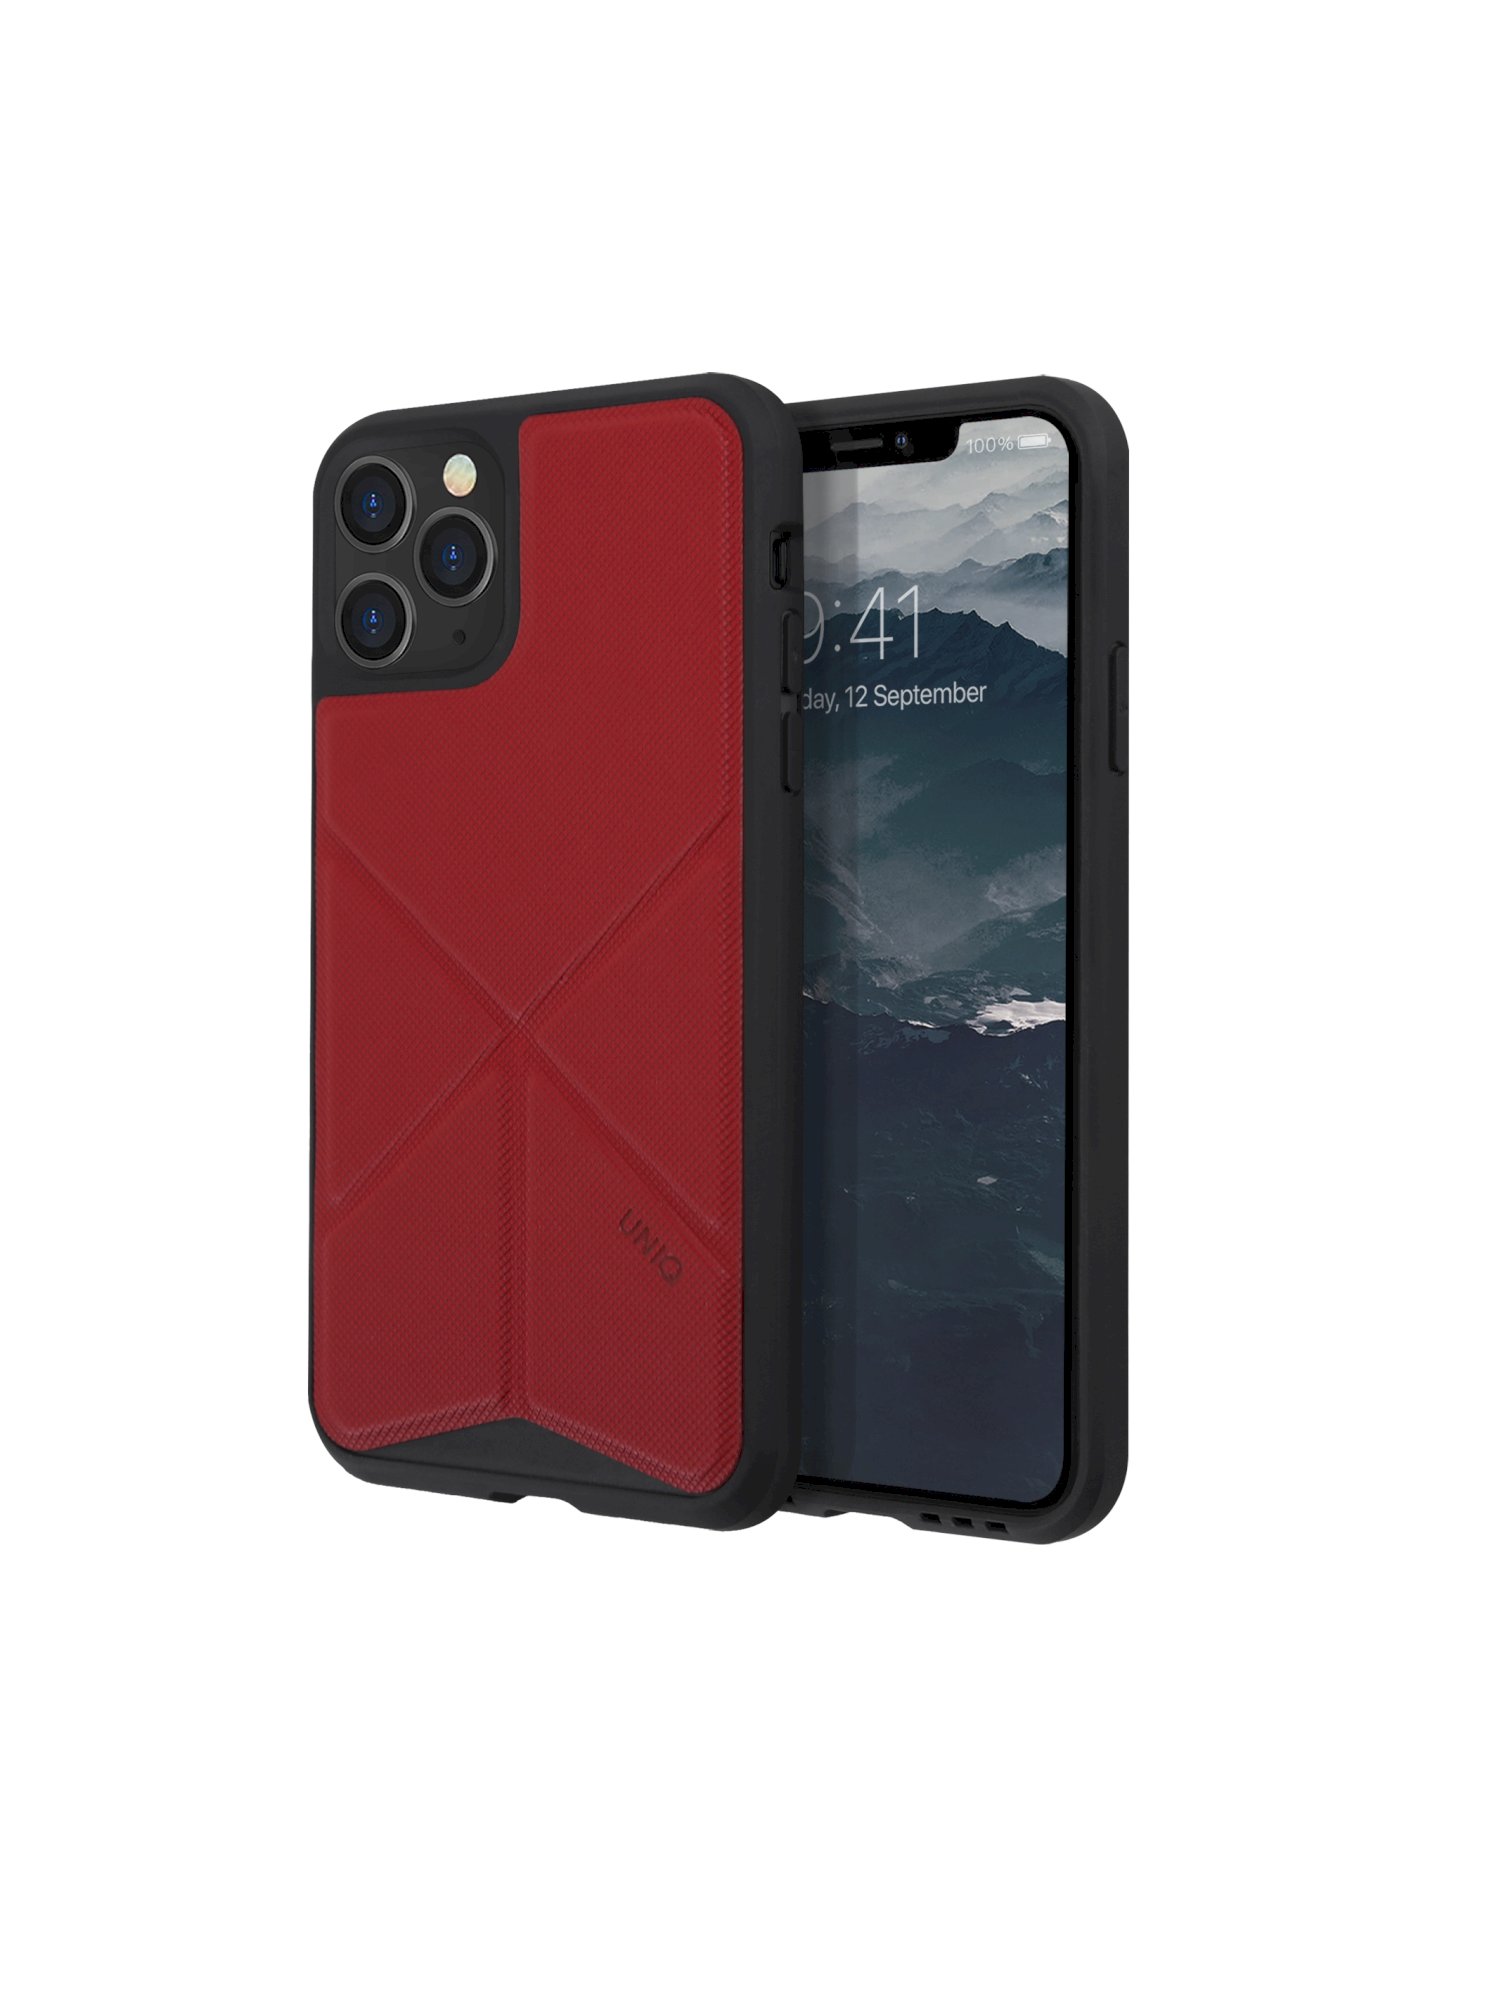 iPhone 11 Pro, case transforma, stand up fury racer, red